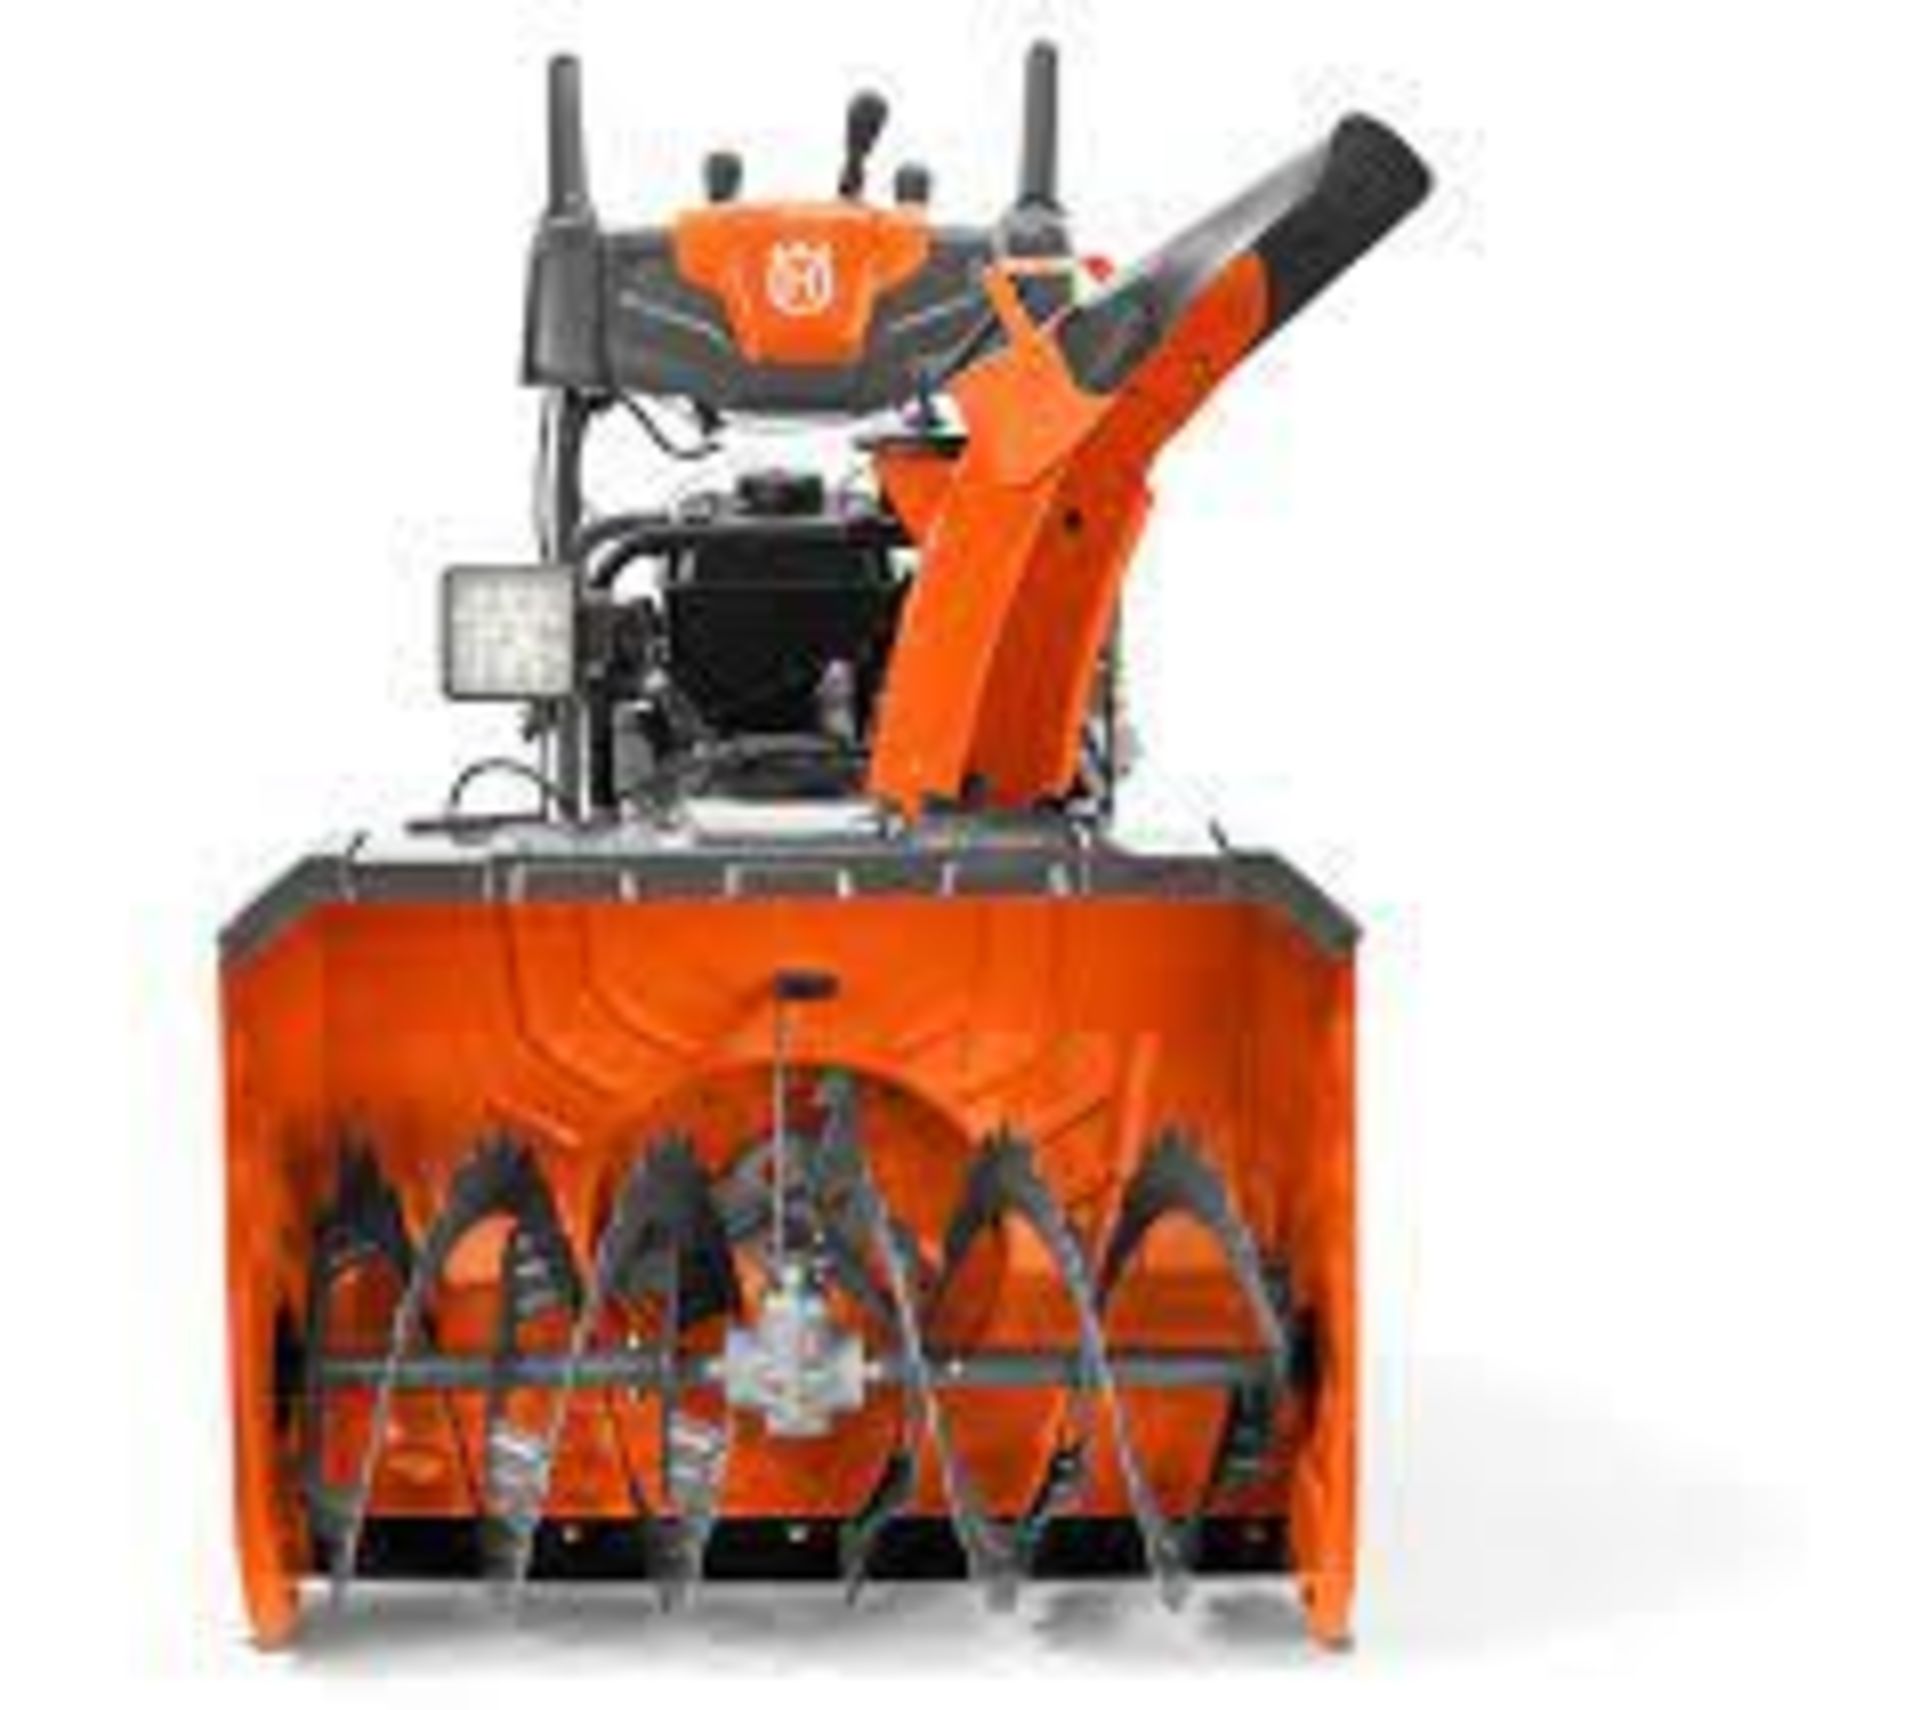 Husqvarna ST 330 Self Propelled Snow Blower - Approx. MSRP $1599 - Image 3 of 5